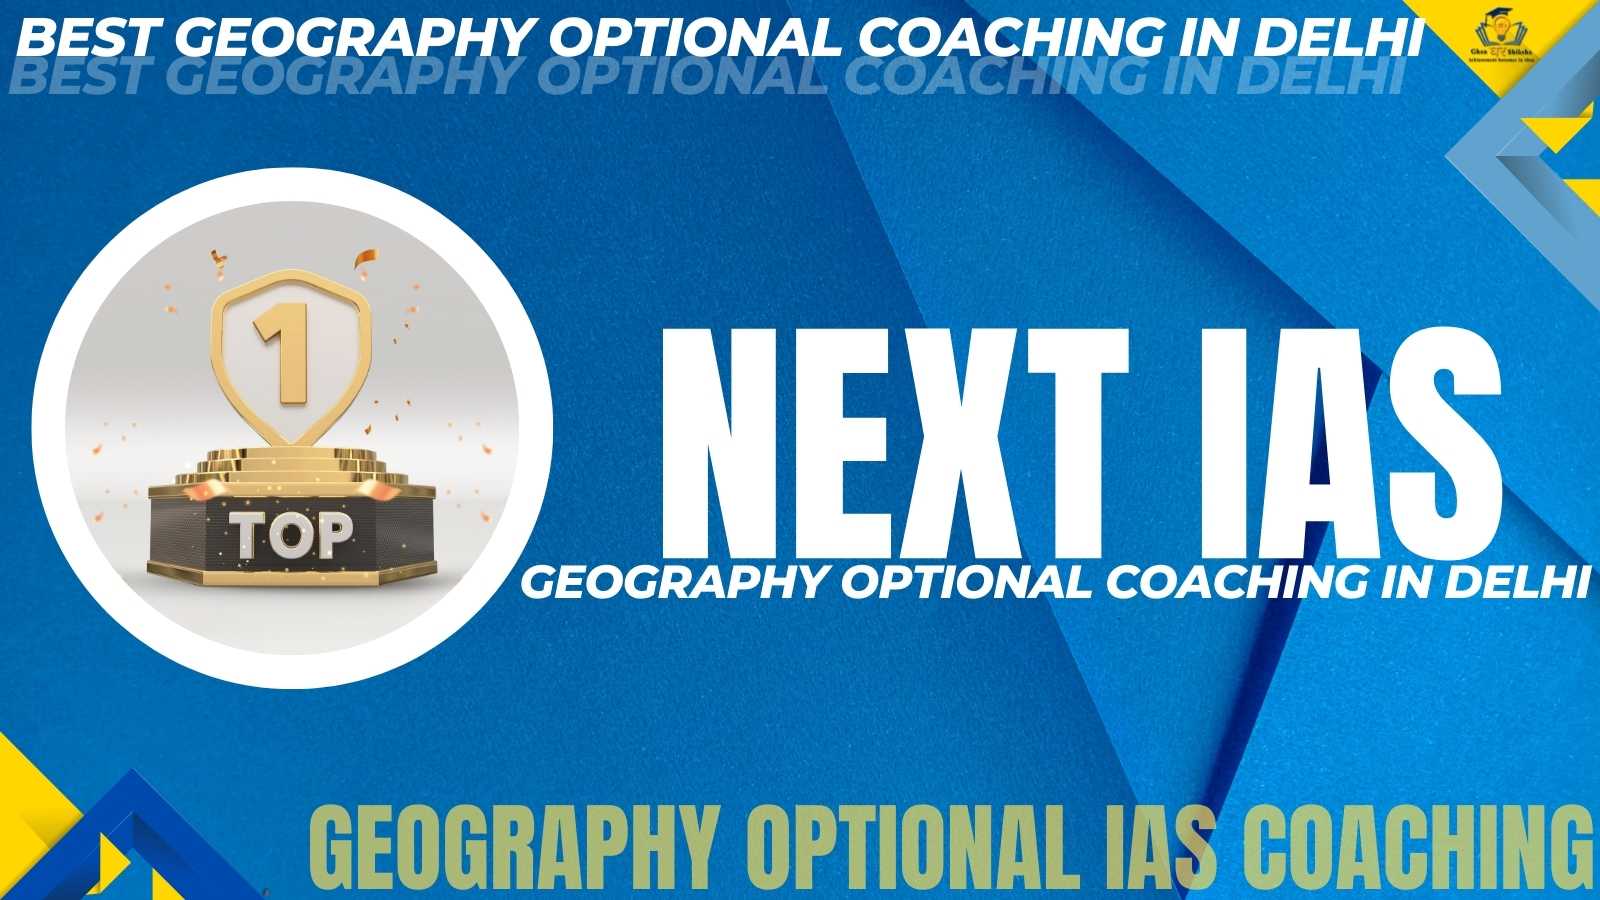 Best Geography Optional Coaching Institute of Delhi